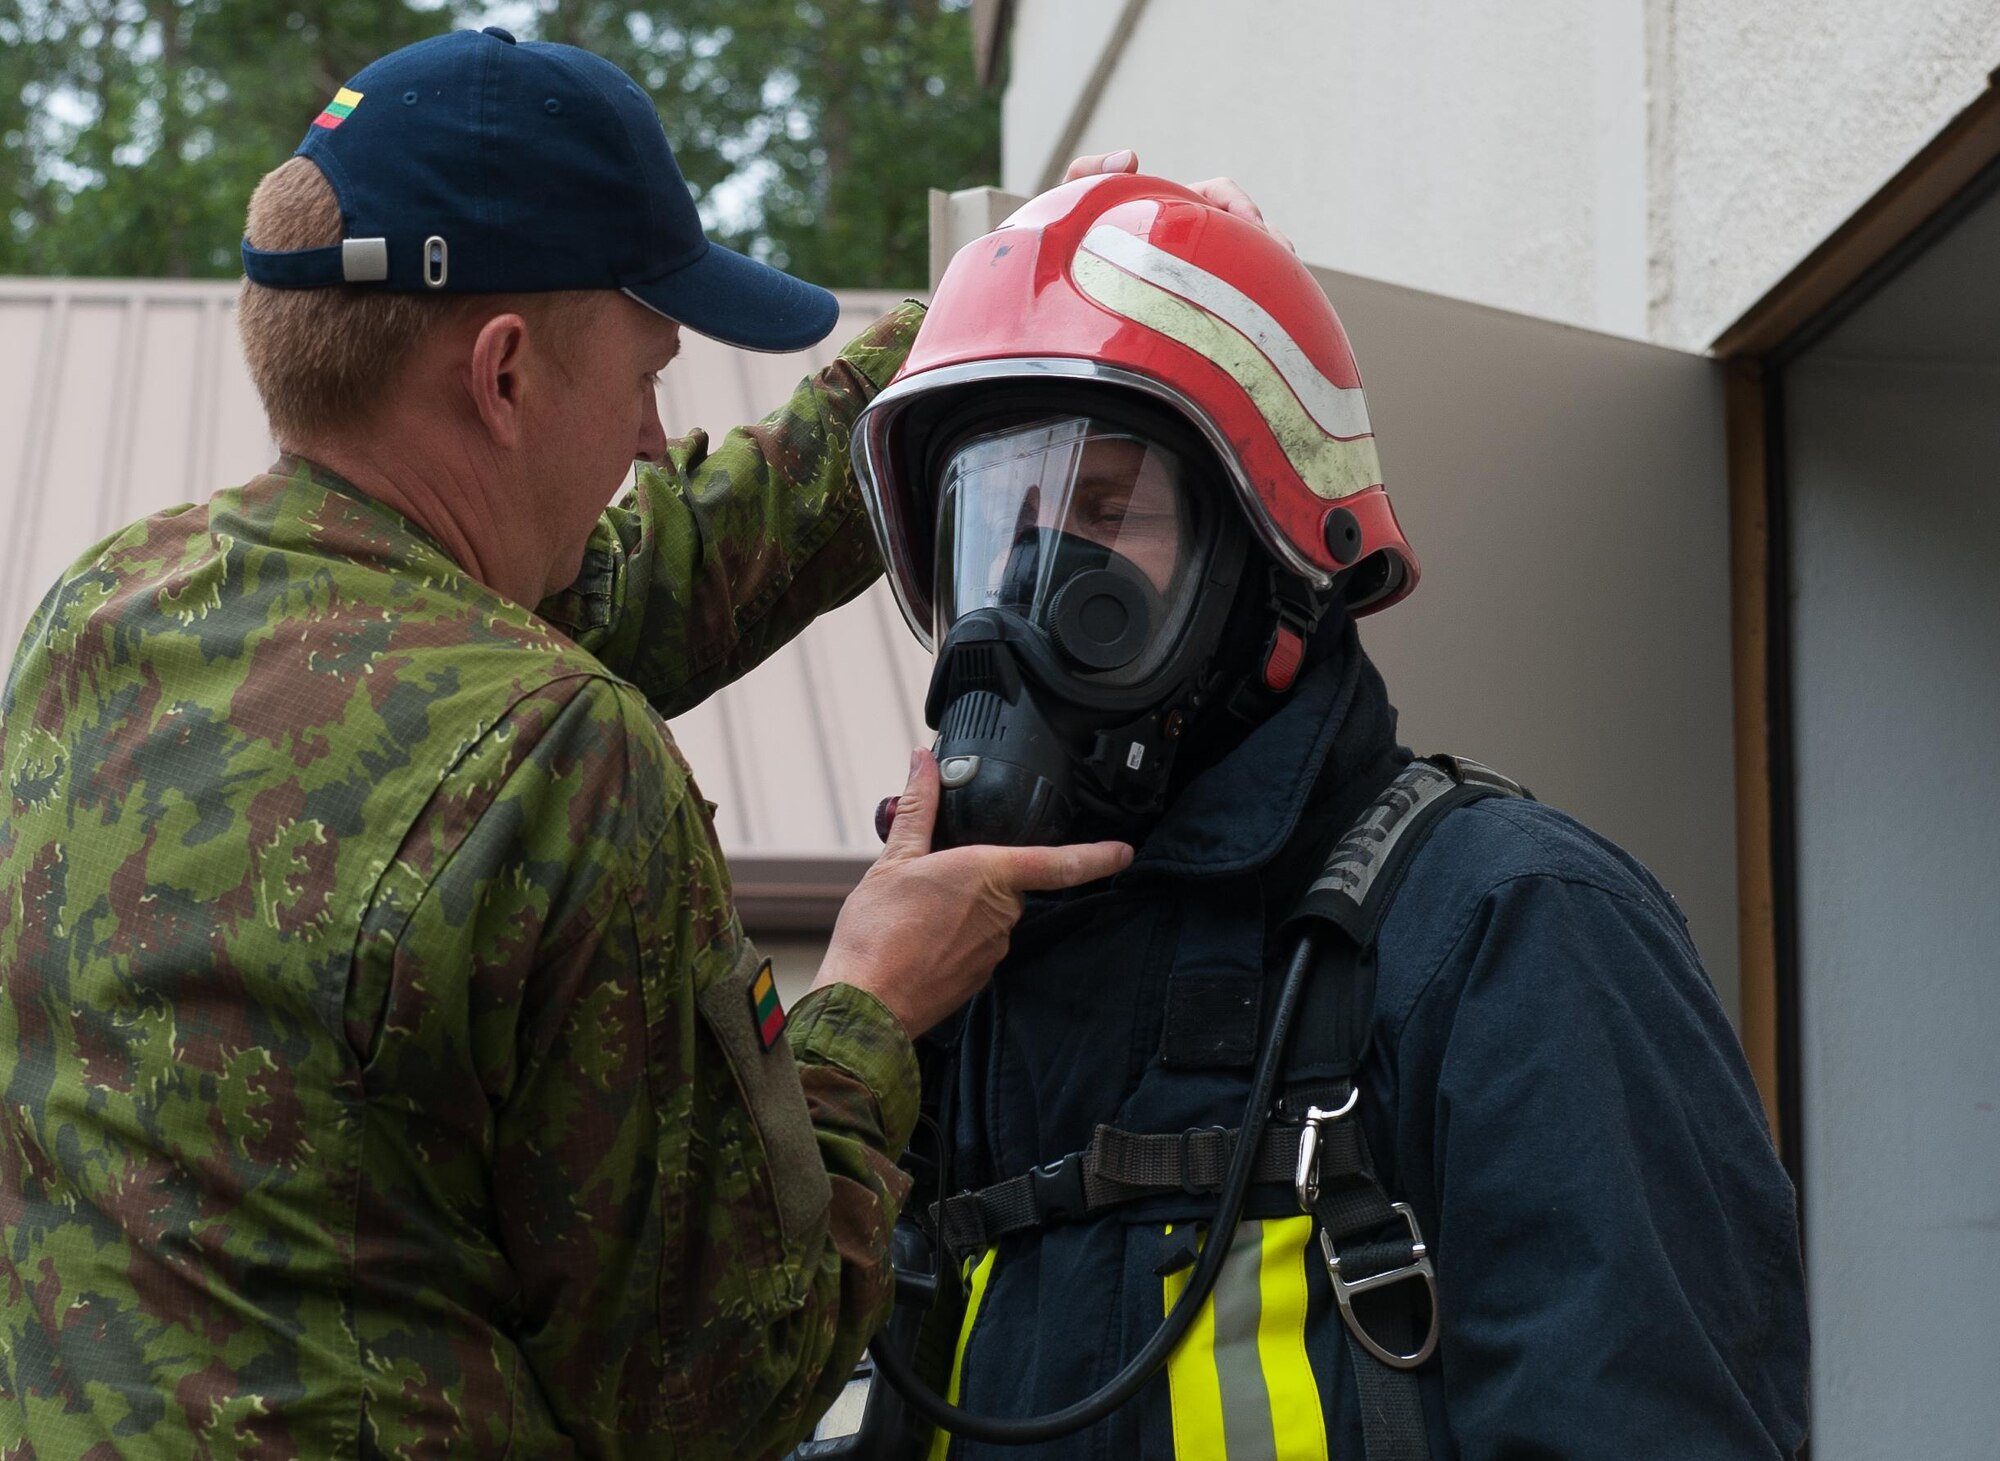 Lithuanian air force Staff Sgt. Valdas Parnarauskas, fire and rescue section commander, helps LAF Capt. Egidijus Rastikis, safety representative, equip firefighter gear before participating in a 435th Construction and Training Squadron-led training exercise July 11, 2016, at Ramstein Air Base, Germany. The 435th CTS provides sufficient training equipment and grounds for its allies to train while receiving guidance and equipment from U.S. Airmen to maintain a constant standard of mission-readiness across Europe.